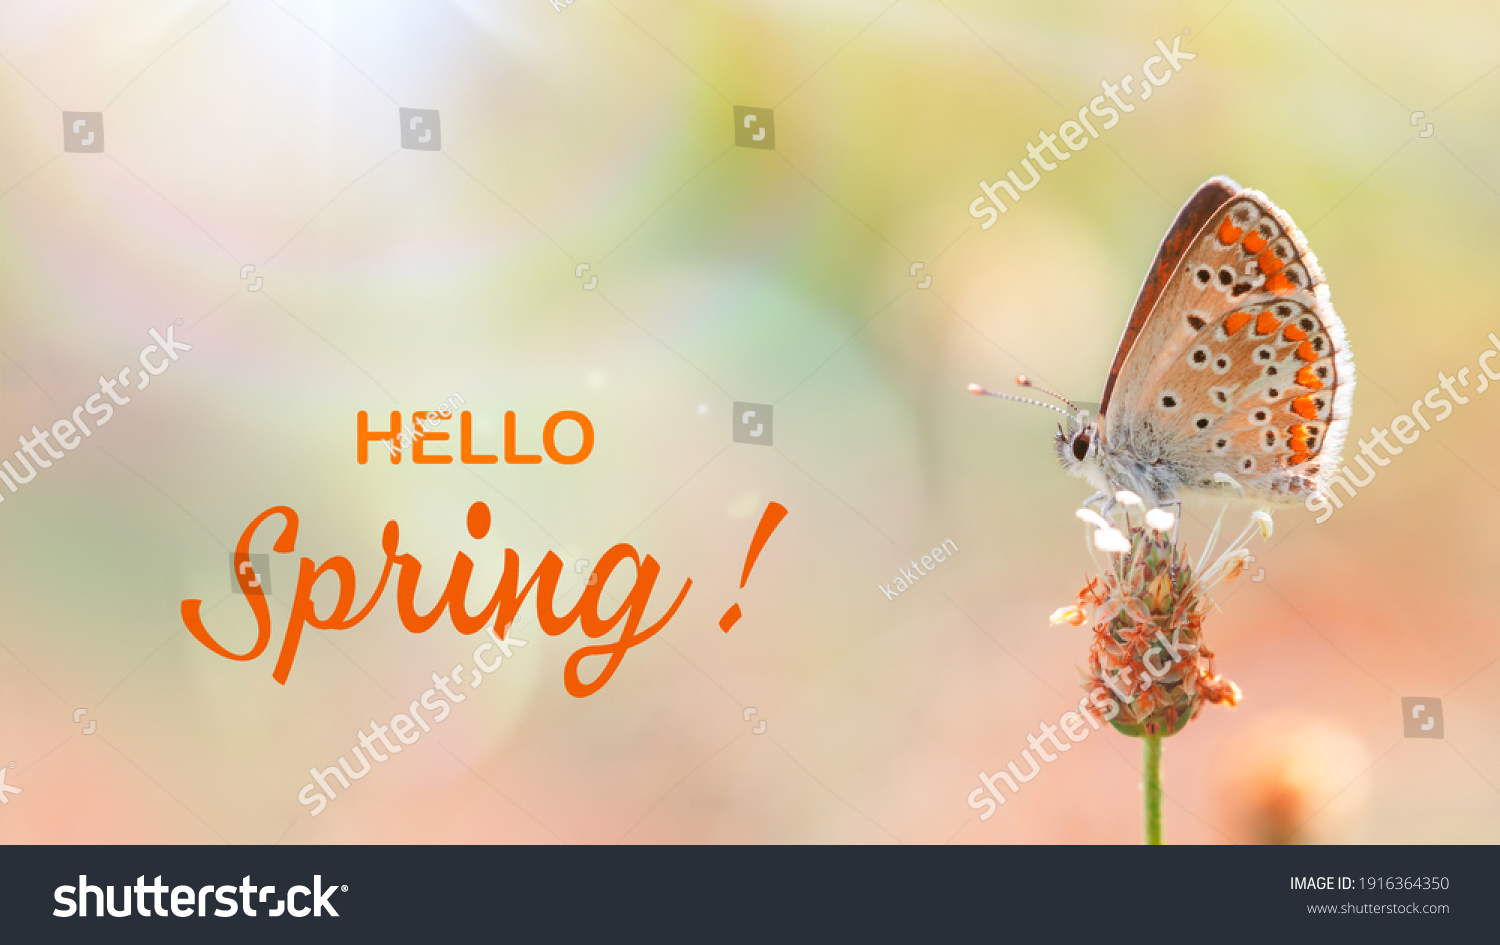 Hello spring. One butterfly roosting on a bud, close-up side view with a blurred background. Orange butterfly on a blurred fairytale wild meadow background. #1916364350